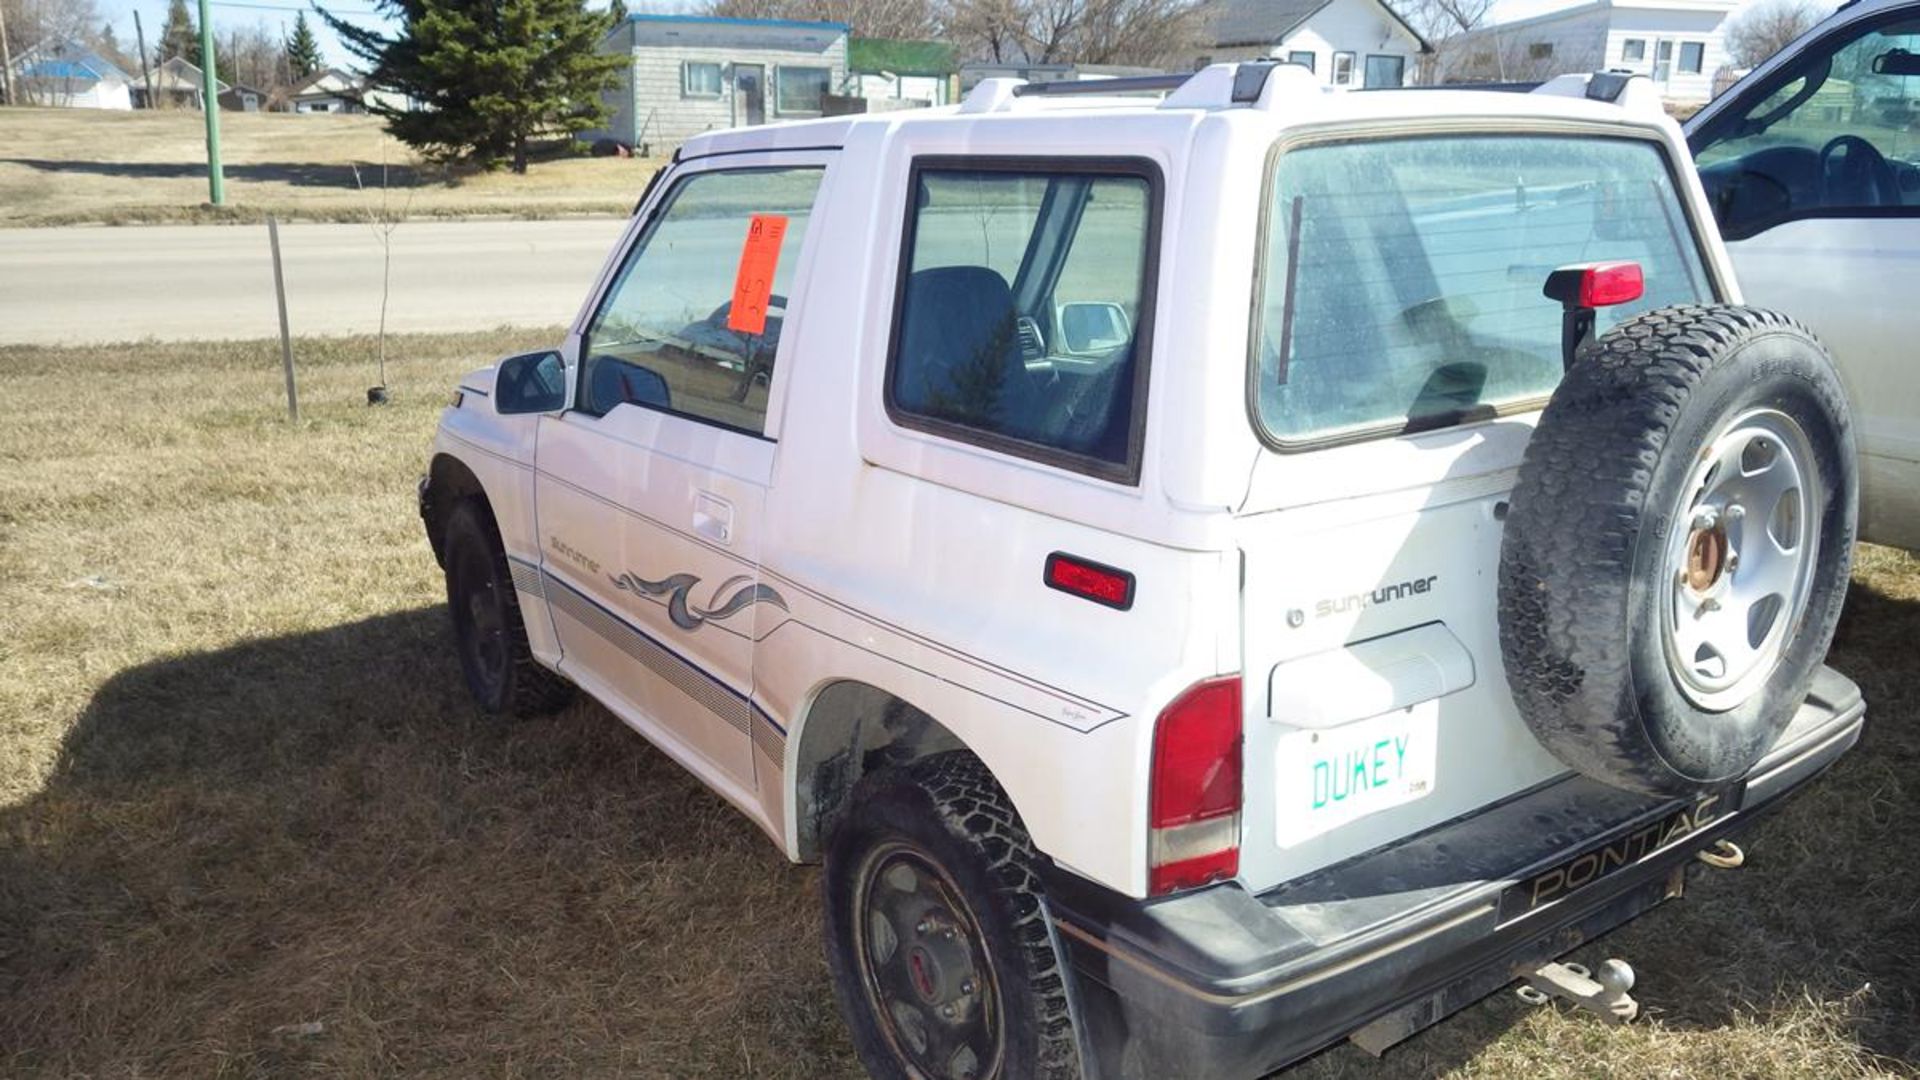 1995 Pontiac Sunrunner 4 x 4 with 4 spd manual tranny, 191,465 KMS, Vin# 2CGBJ1868S6929399 removable - Image 2 of 16